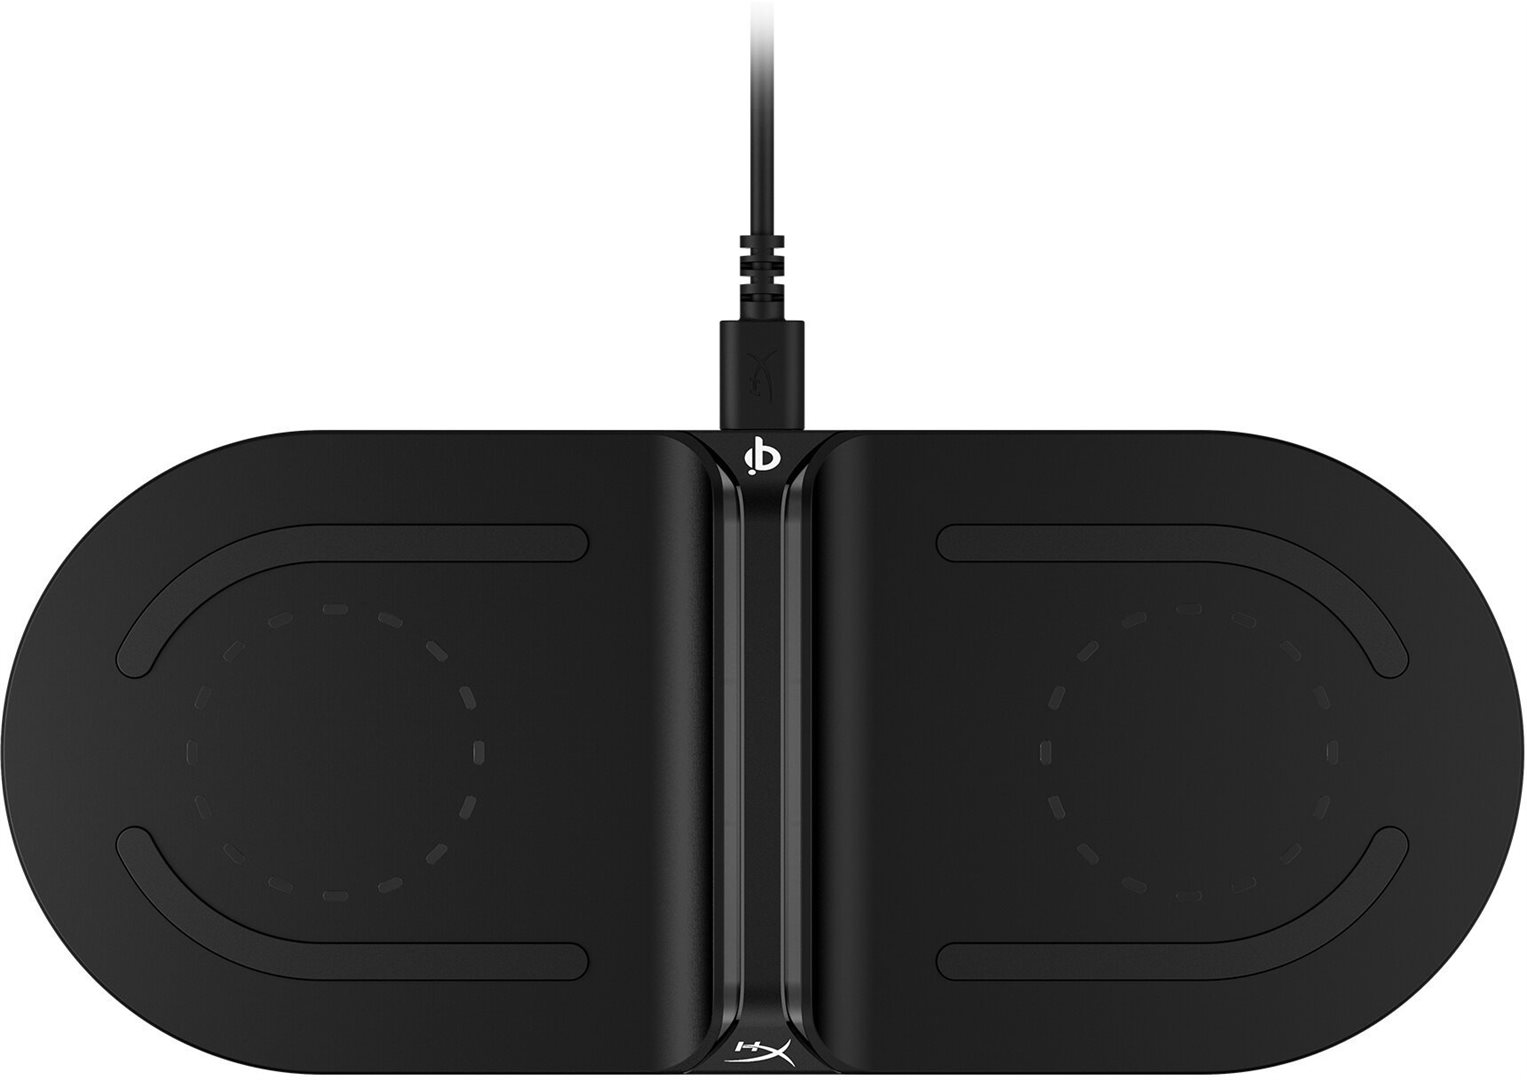 HP HyperX ChargePlay Base - Qi Wireless Charger (EU)